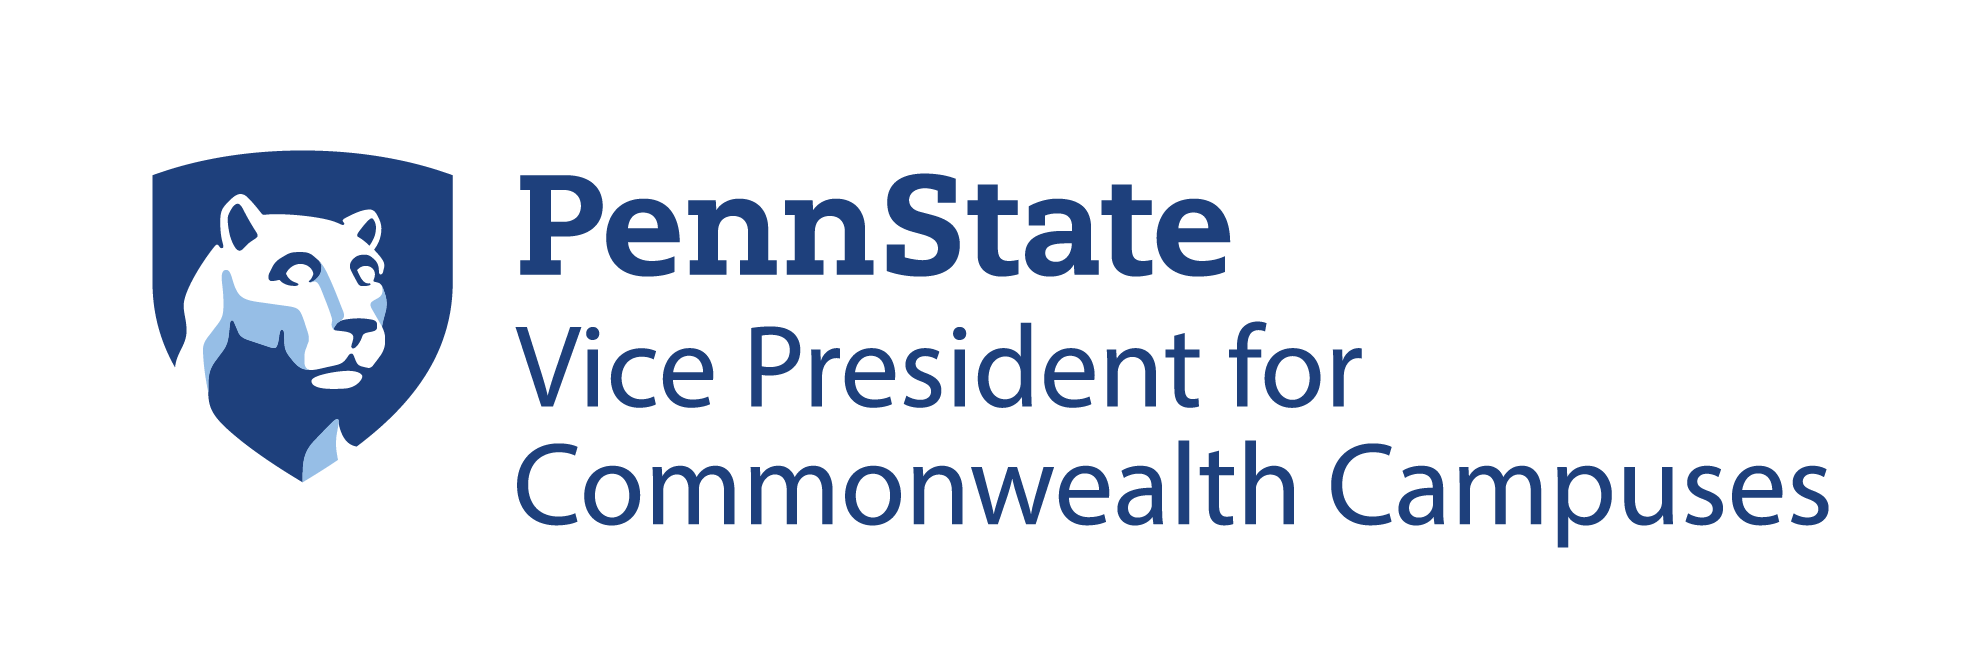 Penn State Office of the Vice President for Commonwealth Campuses mark